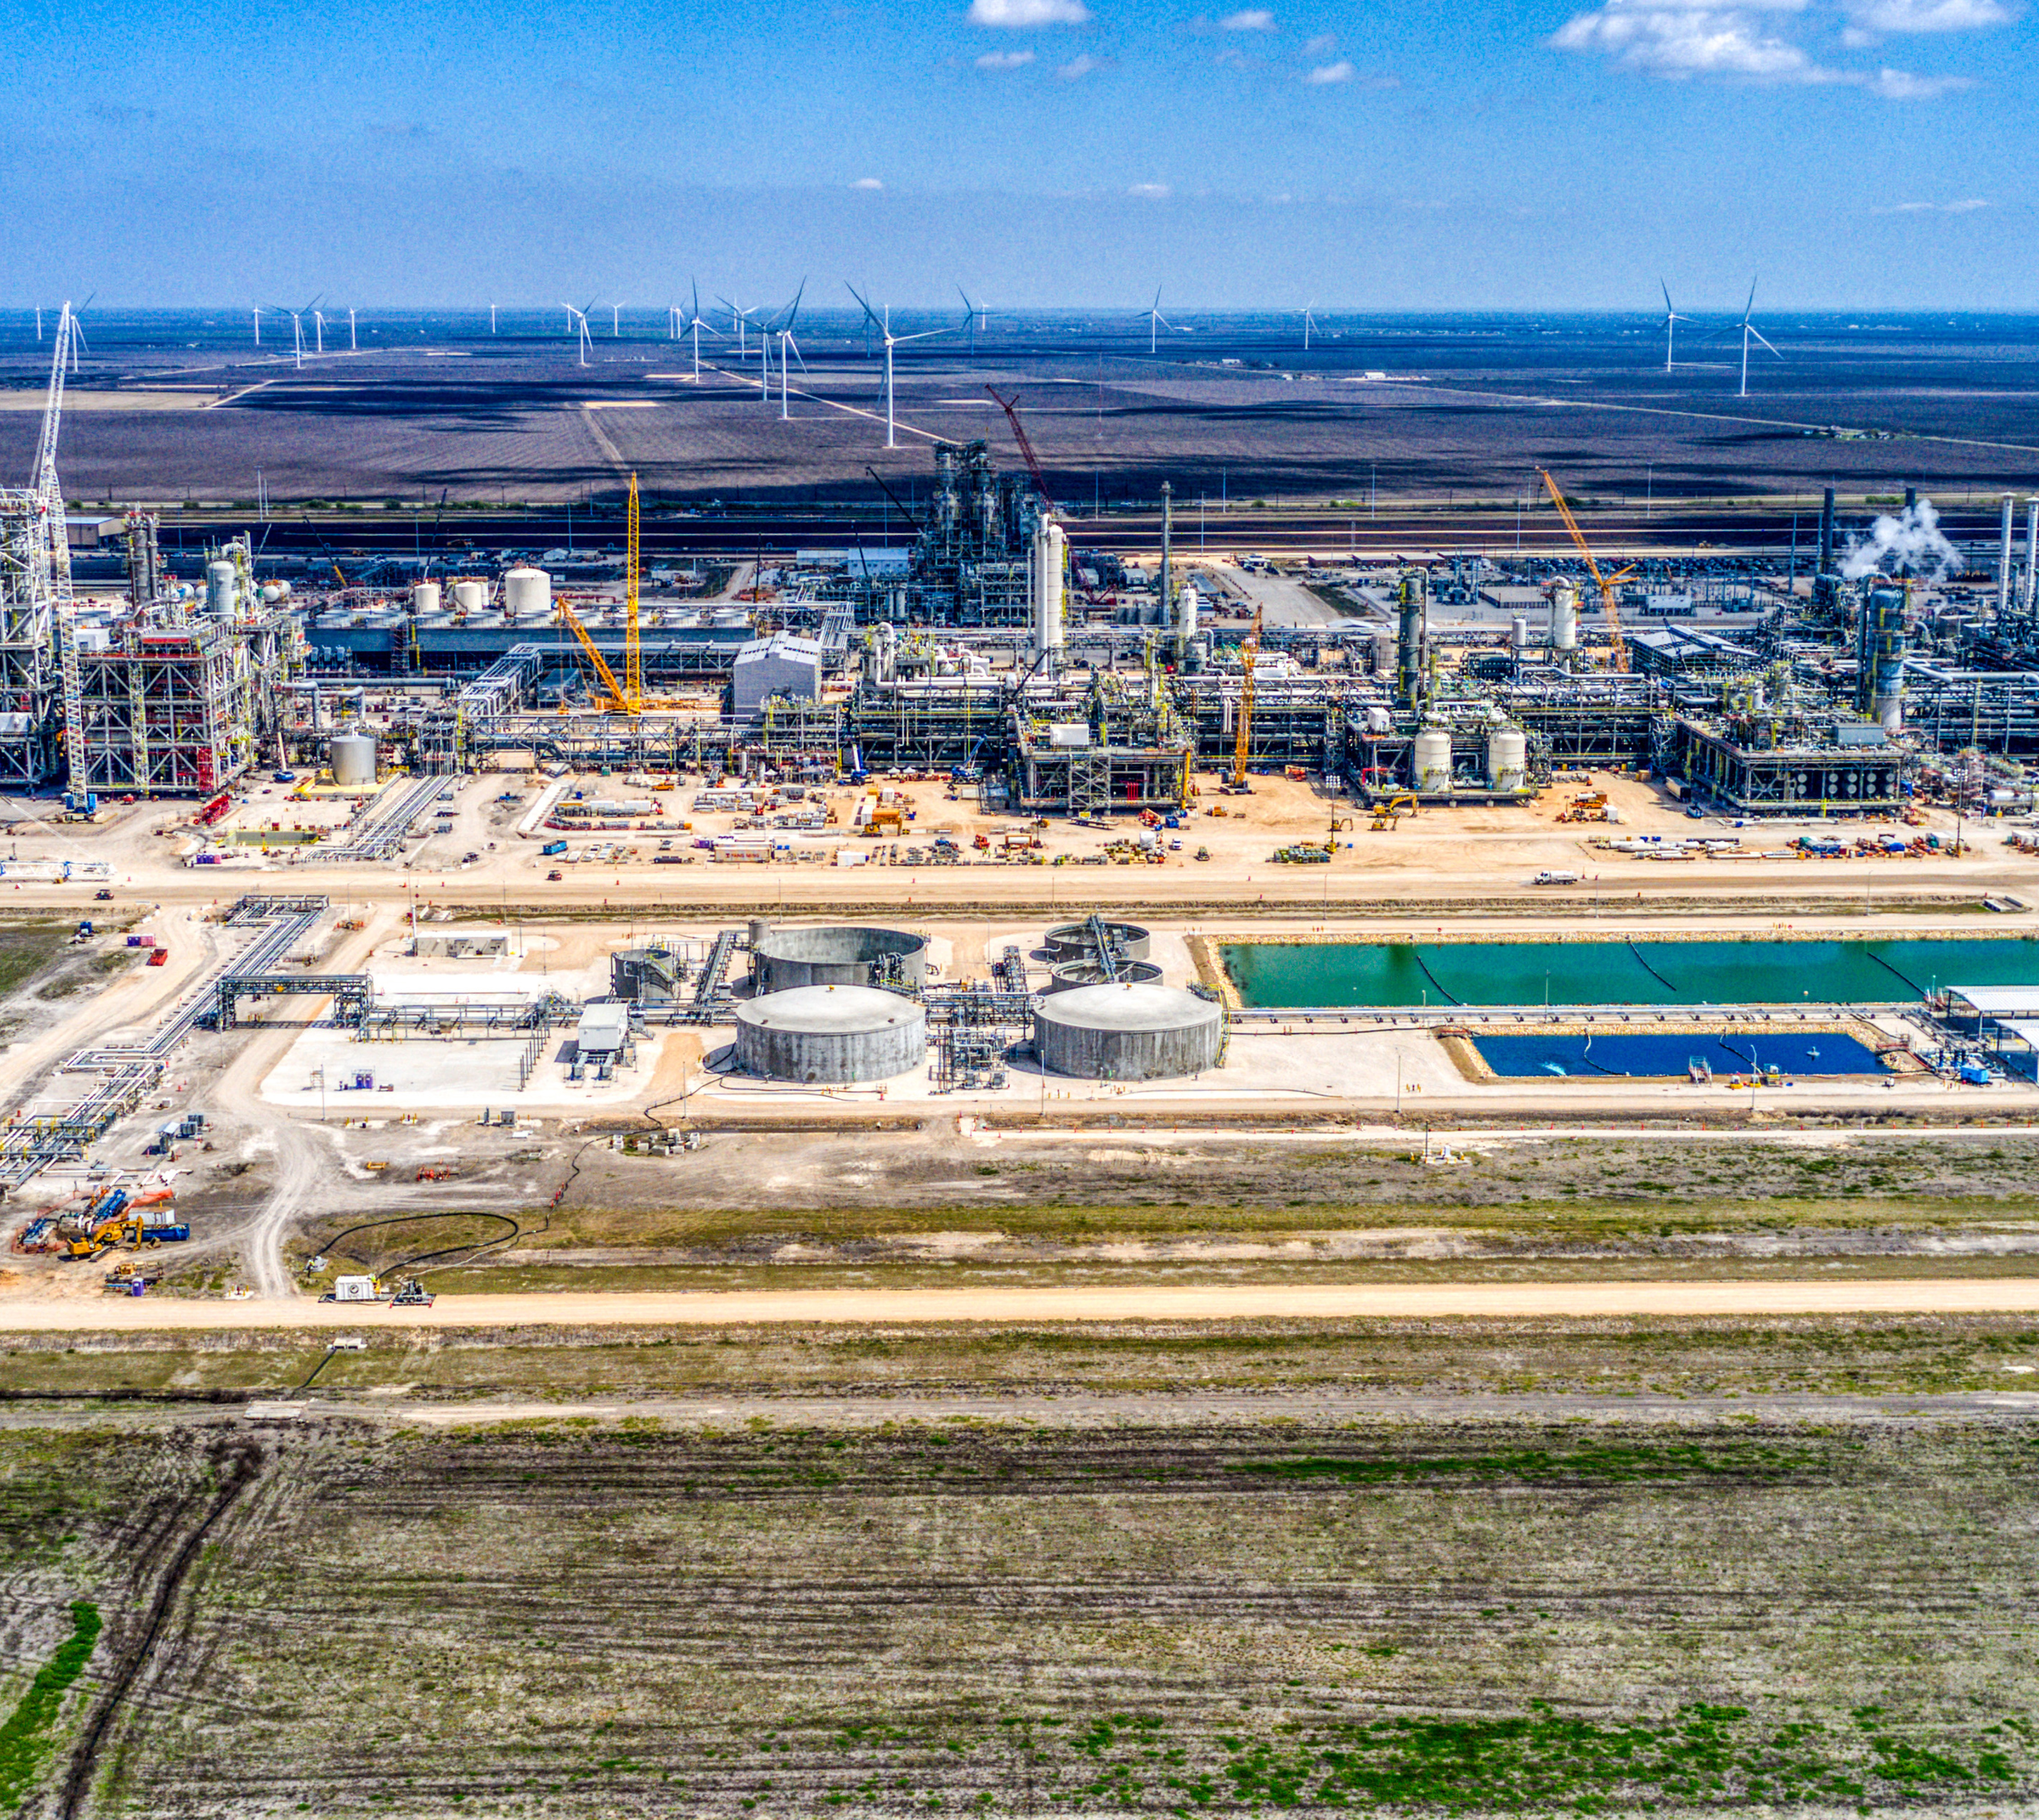 a refining site underconstruction. storage tanks for producs infront. to the right of the storage tanks is a water storage pool. behind the plant are turbines from a neighboring wind farm scattered across farm land.